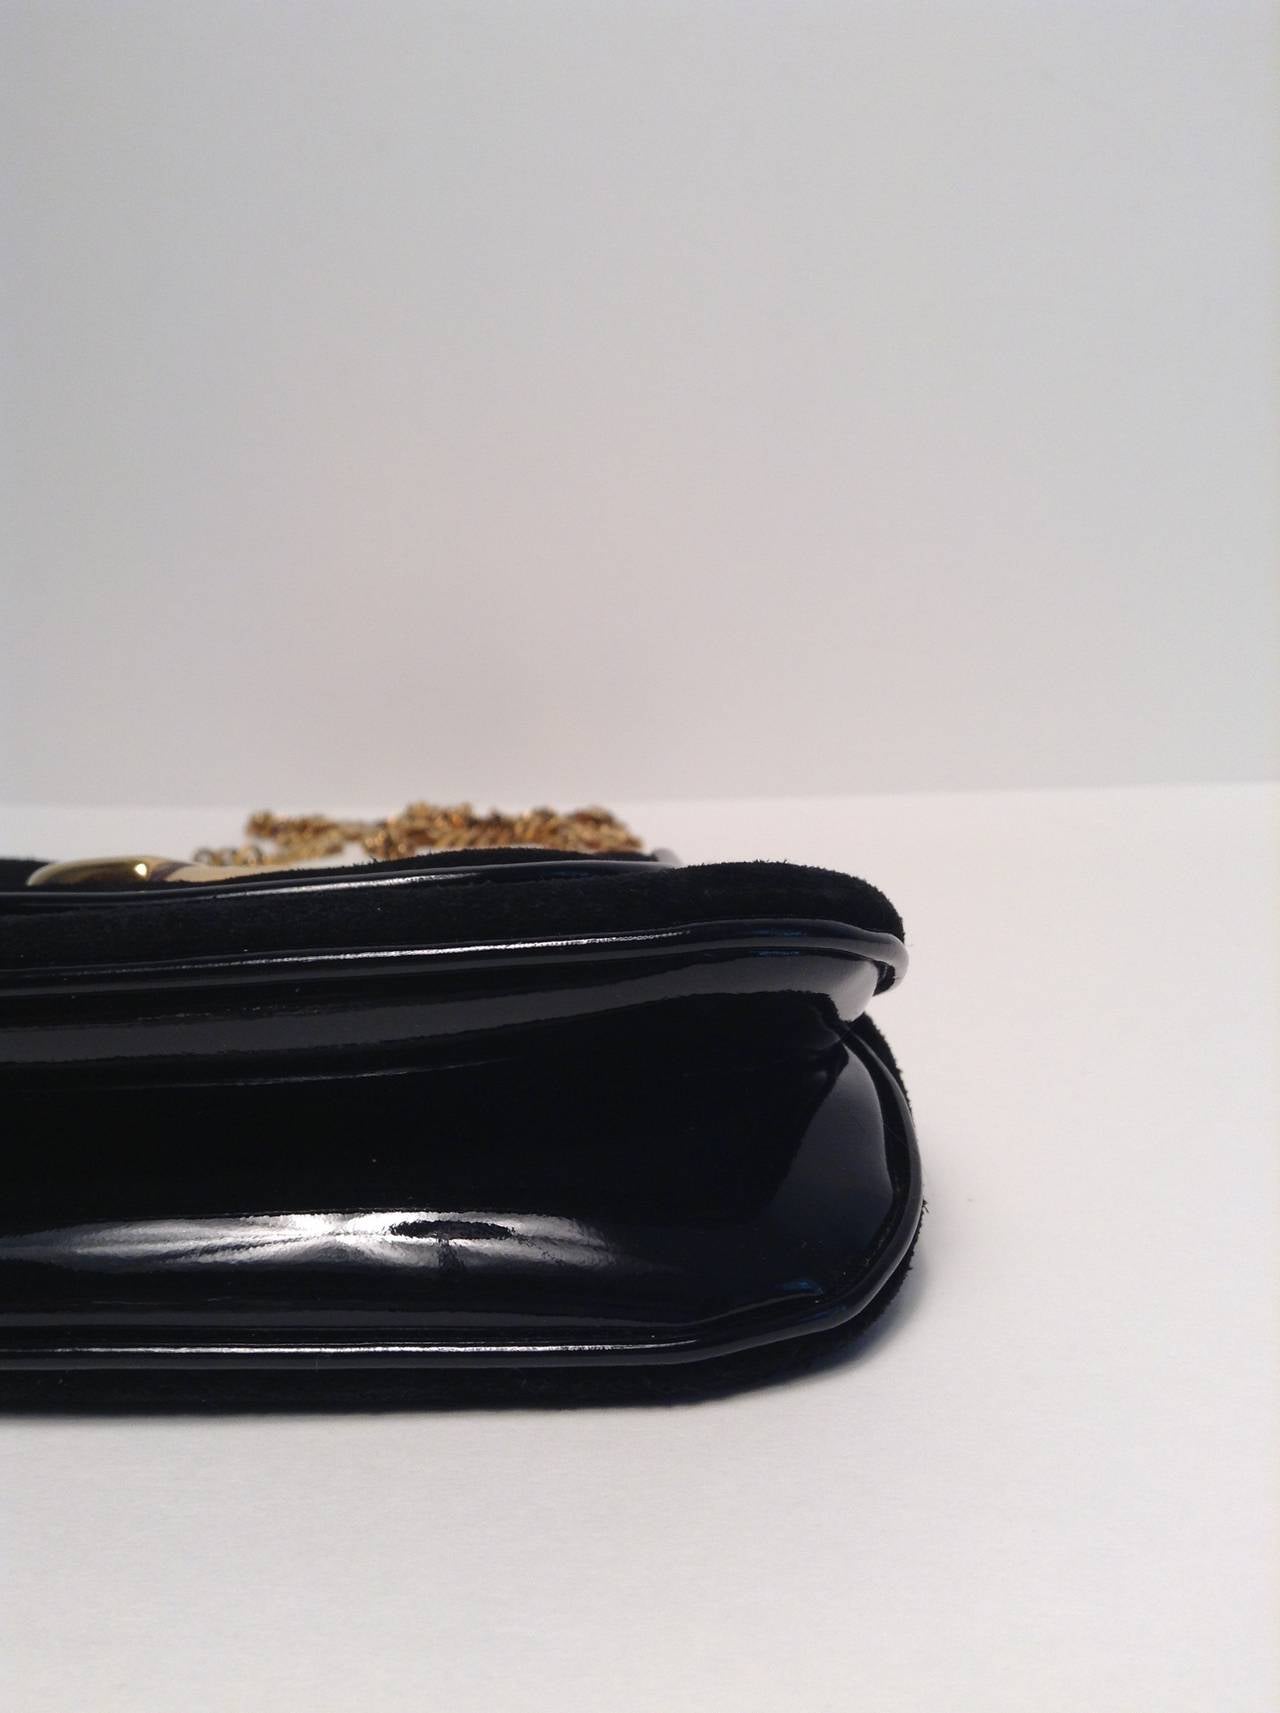 Gucci Black Suede Gold Chain Bag 1973 Reissue 1